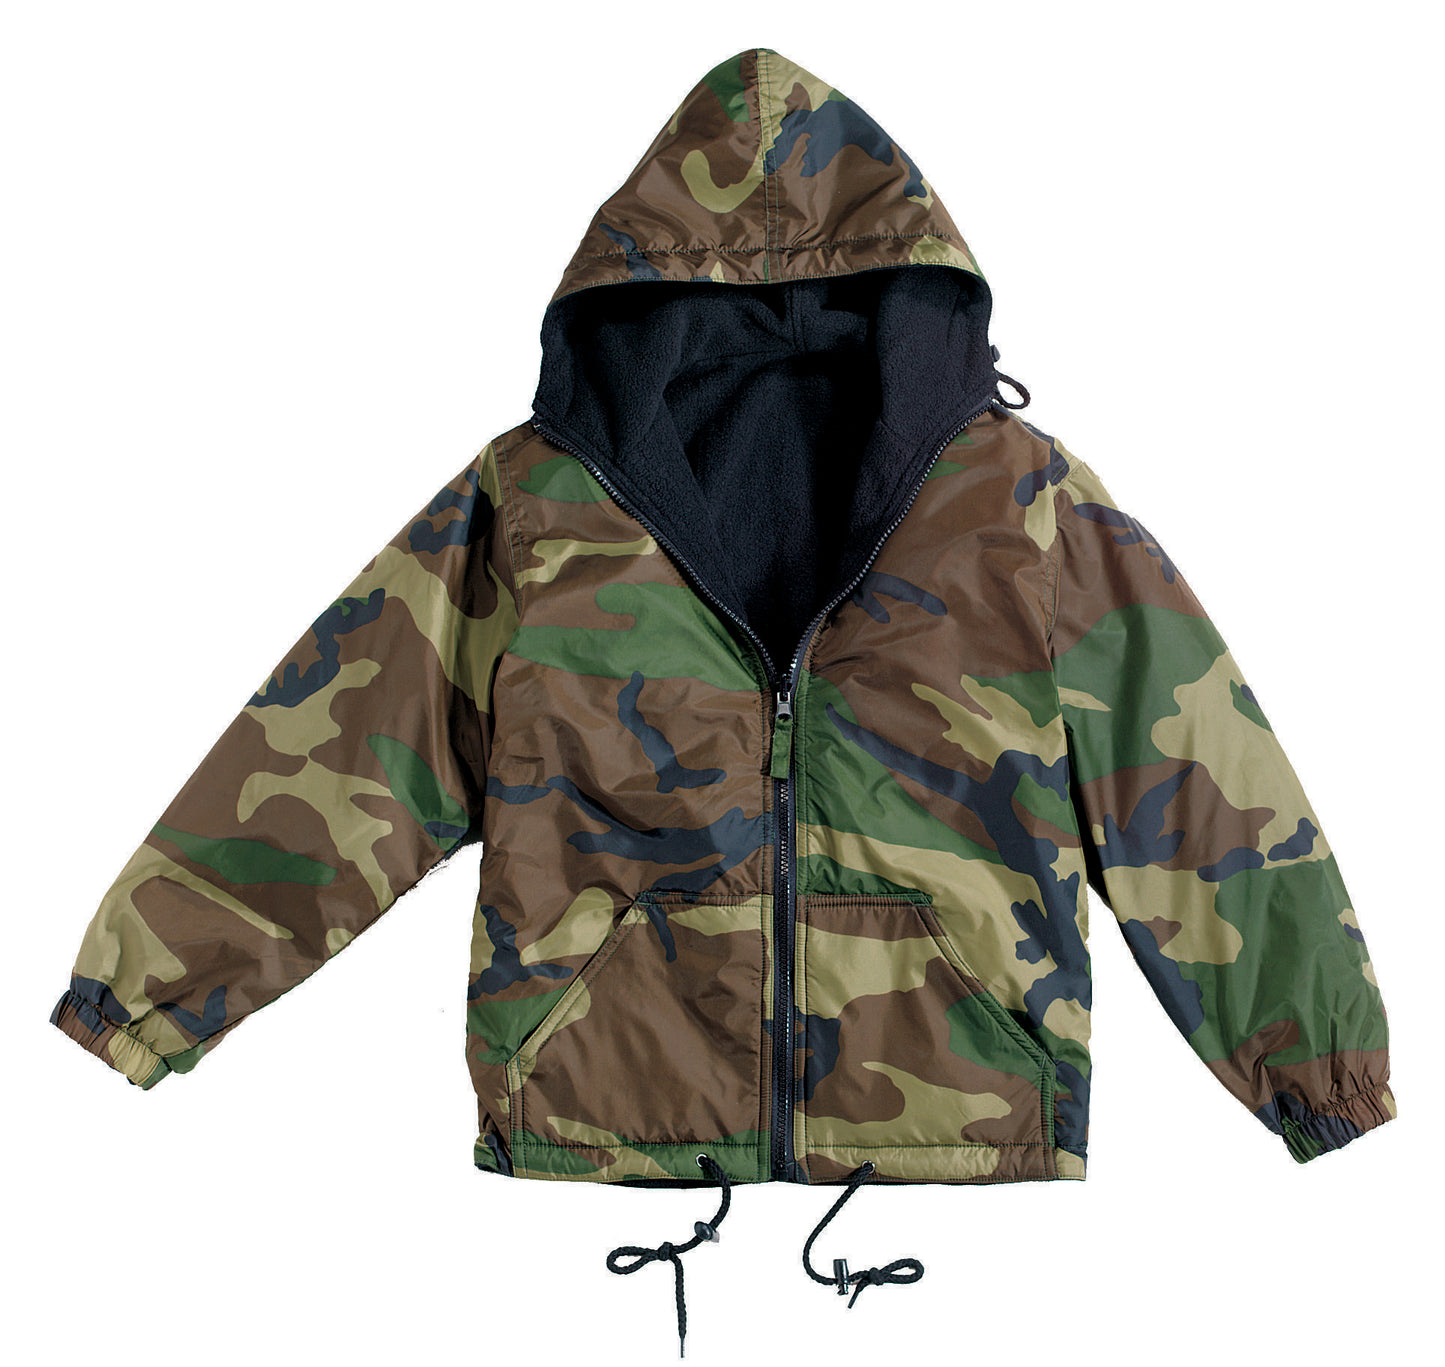 Milspec Reversible Lined Jacket With Hood Camo Outerwear MilTac Tactical Military Outdoor Gear Australia